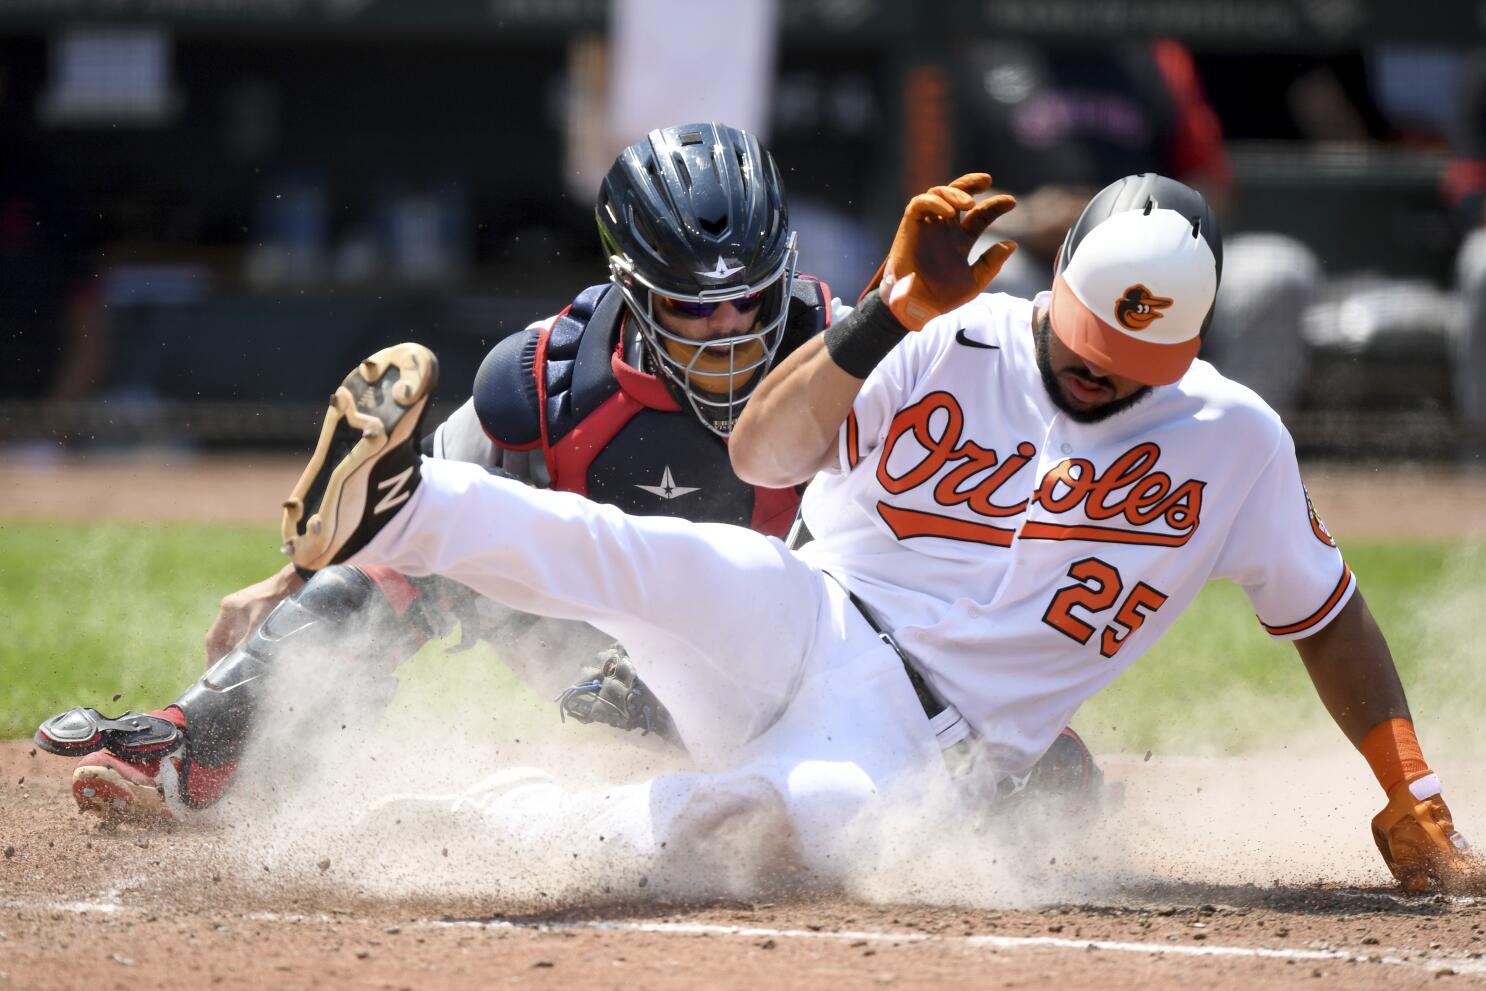 Takeaways from Orioles' difficult opening weekend - Camden Chat